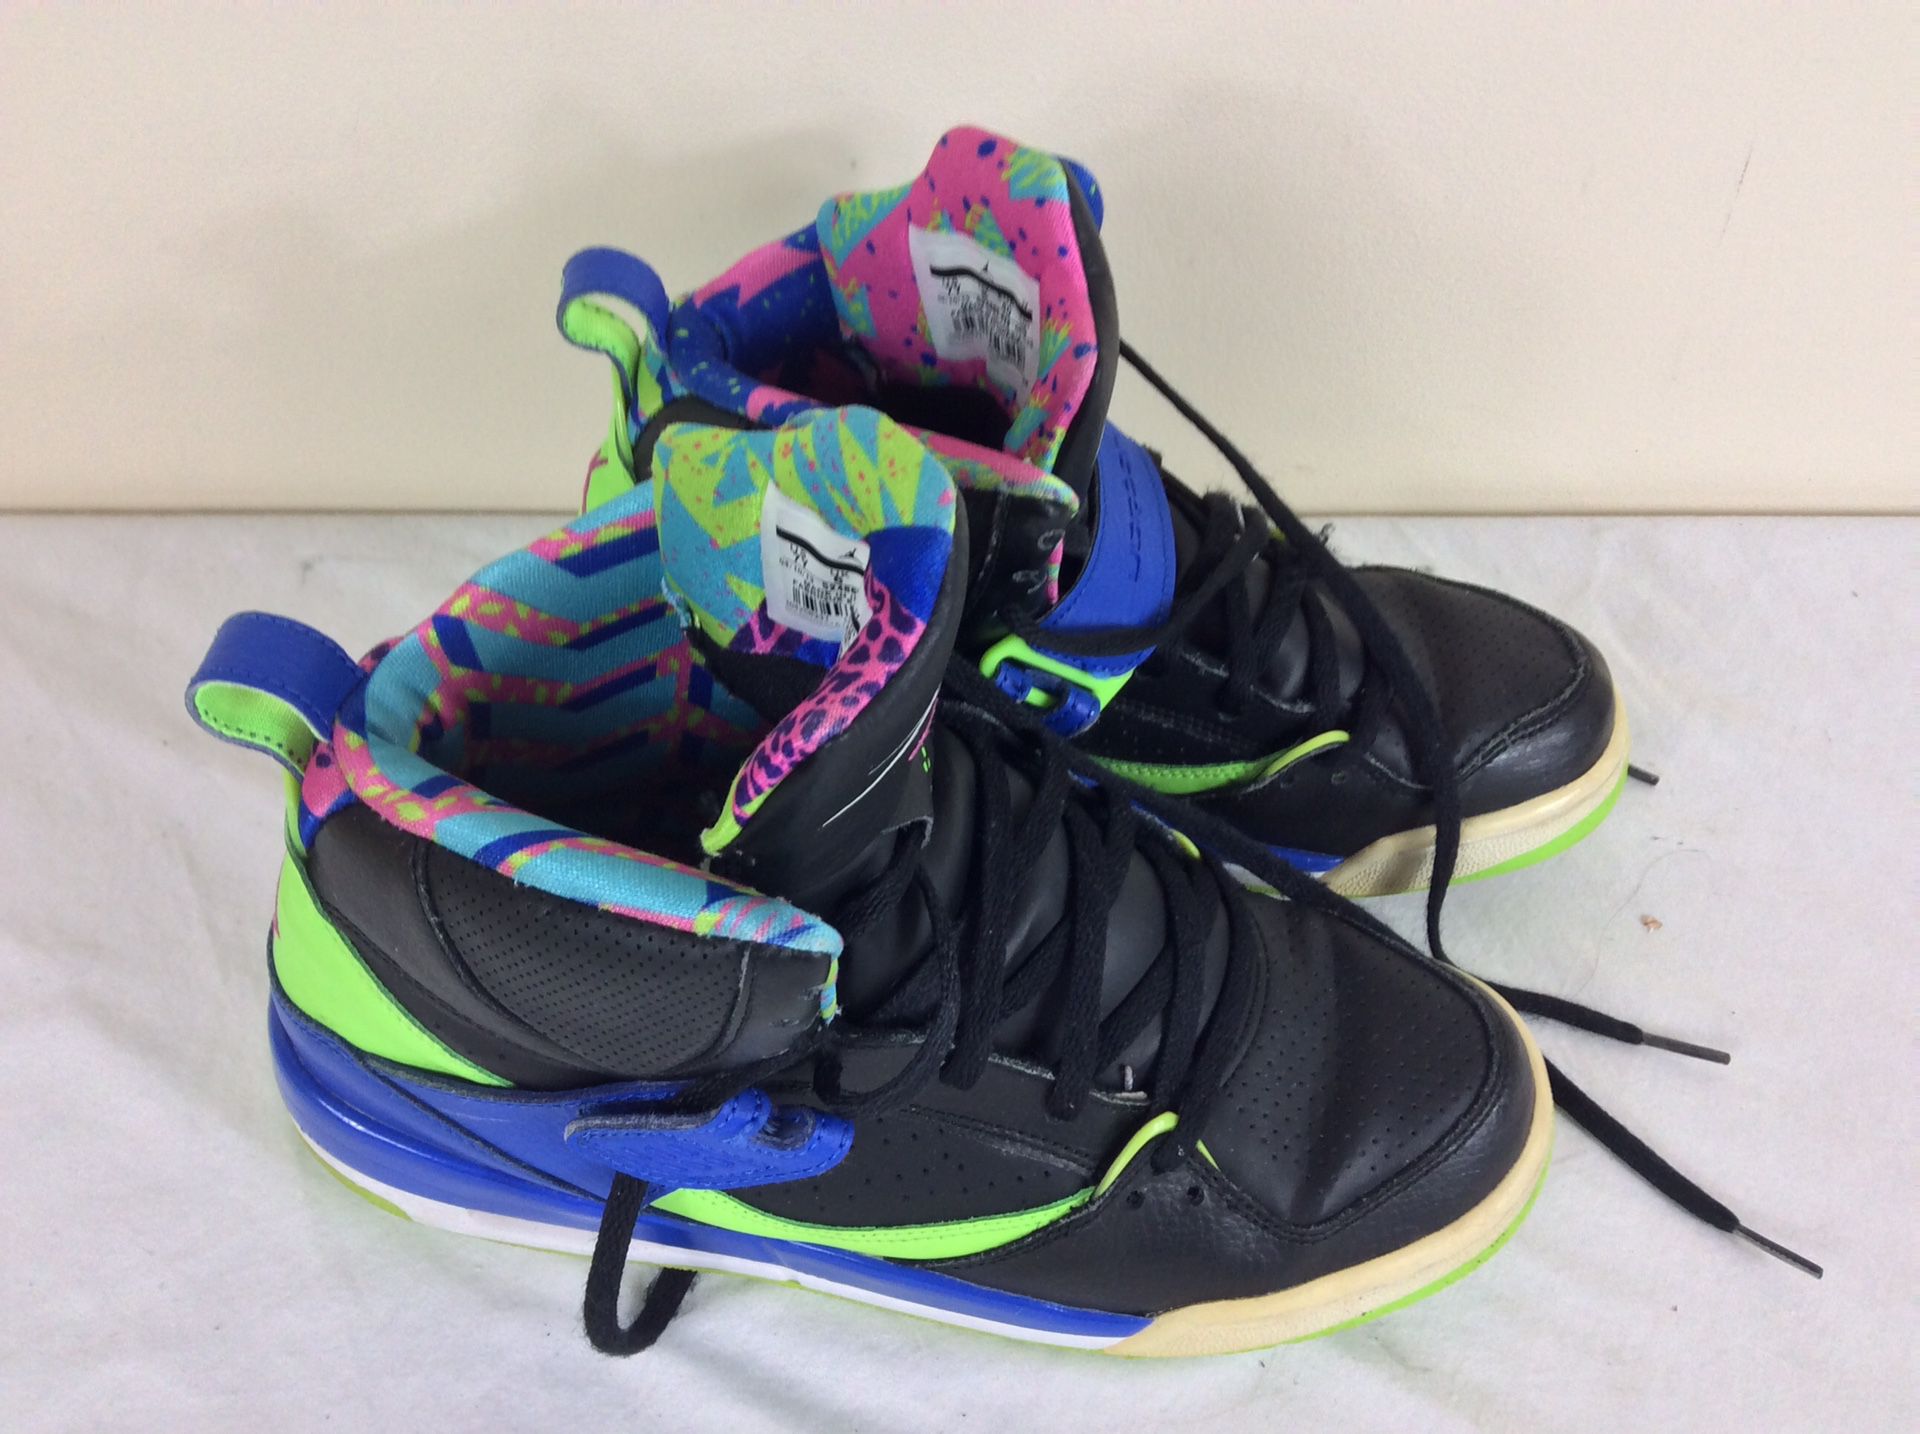 Nike Jordan 45 High GS 7Y Rare Neon Green/RoyalBlue/Blk 524865-029 for Sale in Severn, - OfferUp